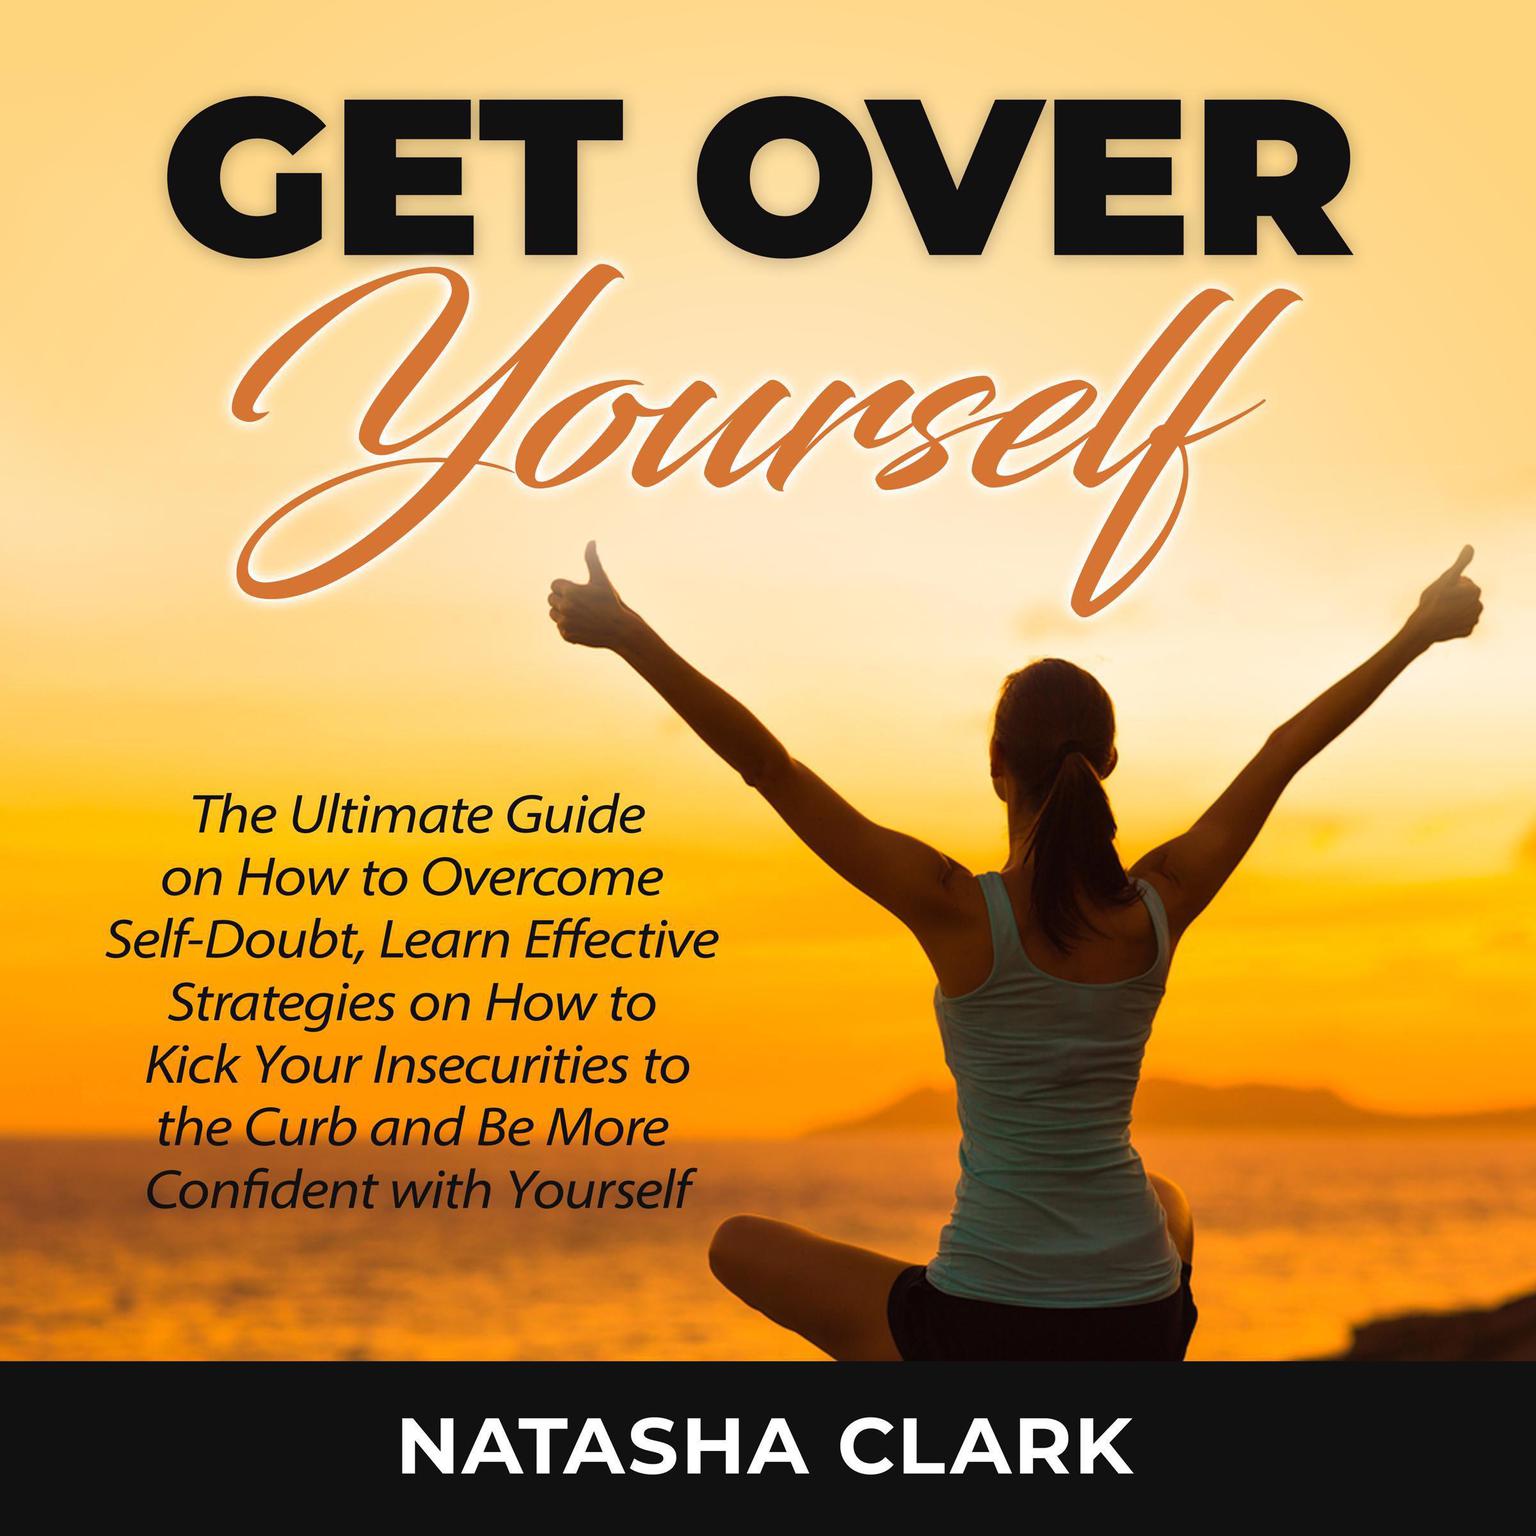 Get Over Yourself: The Ultimate Guide on How to Overcome Self-Doubt, Learn Effective Strategies on How to Kick Your Insecurities to the Curb and Be More Confident with Yourself Audiobook, by Natasha Clark